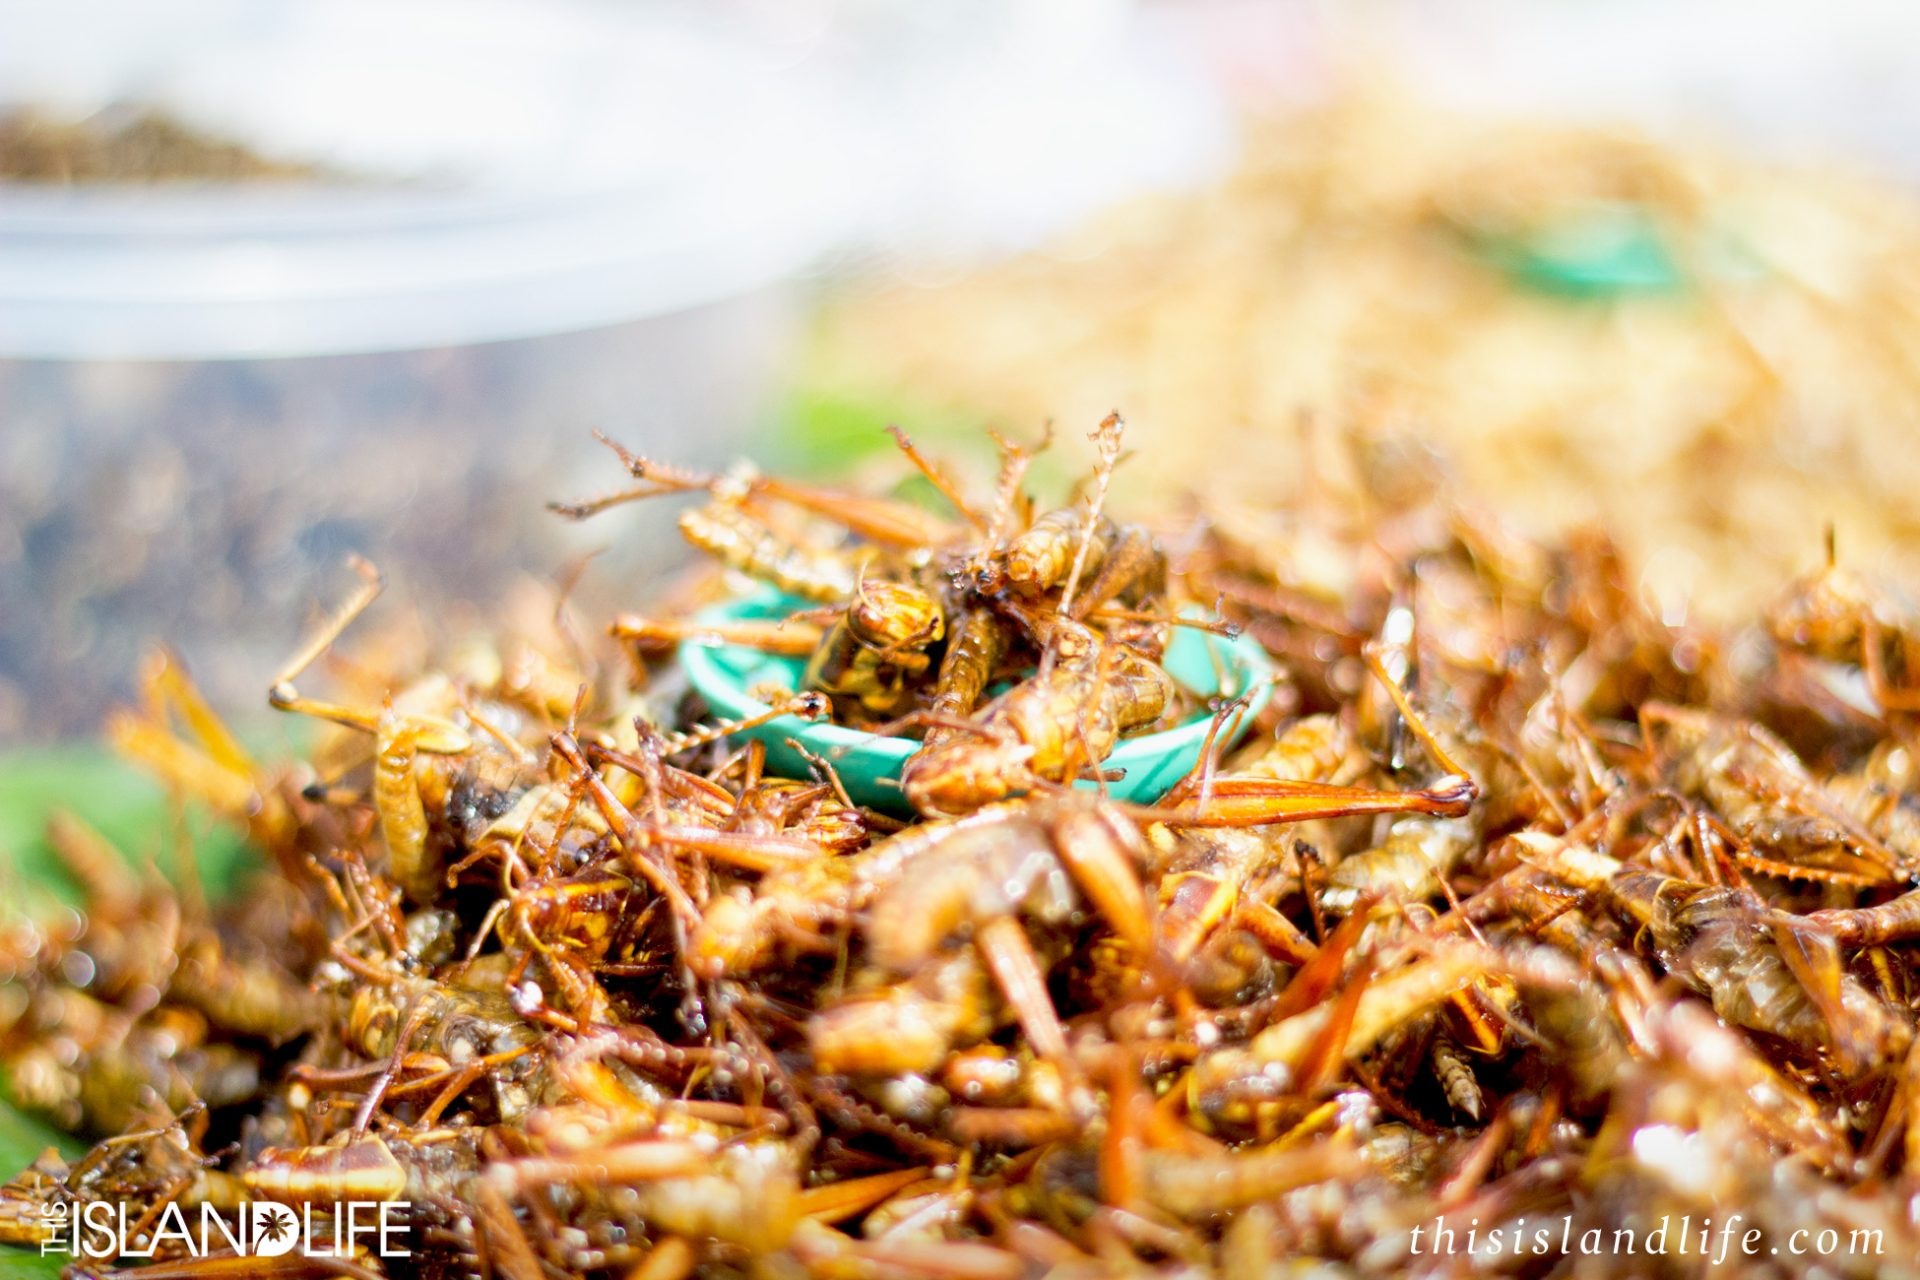 This Island Life | Eating bugs in Thailand